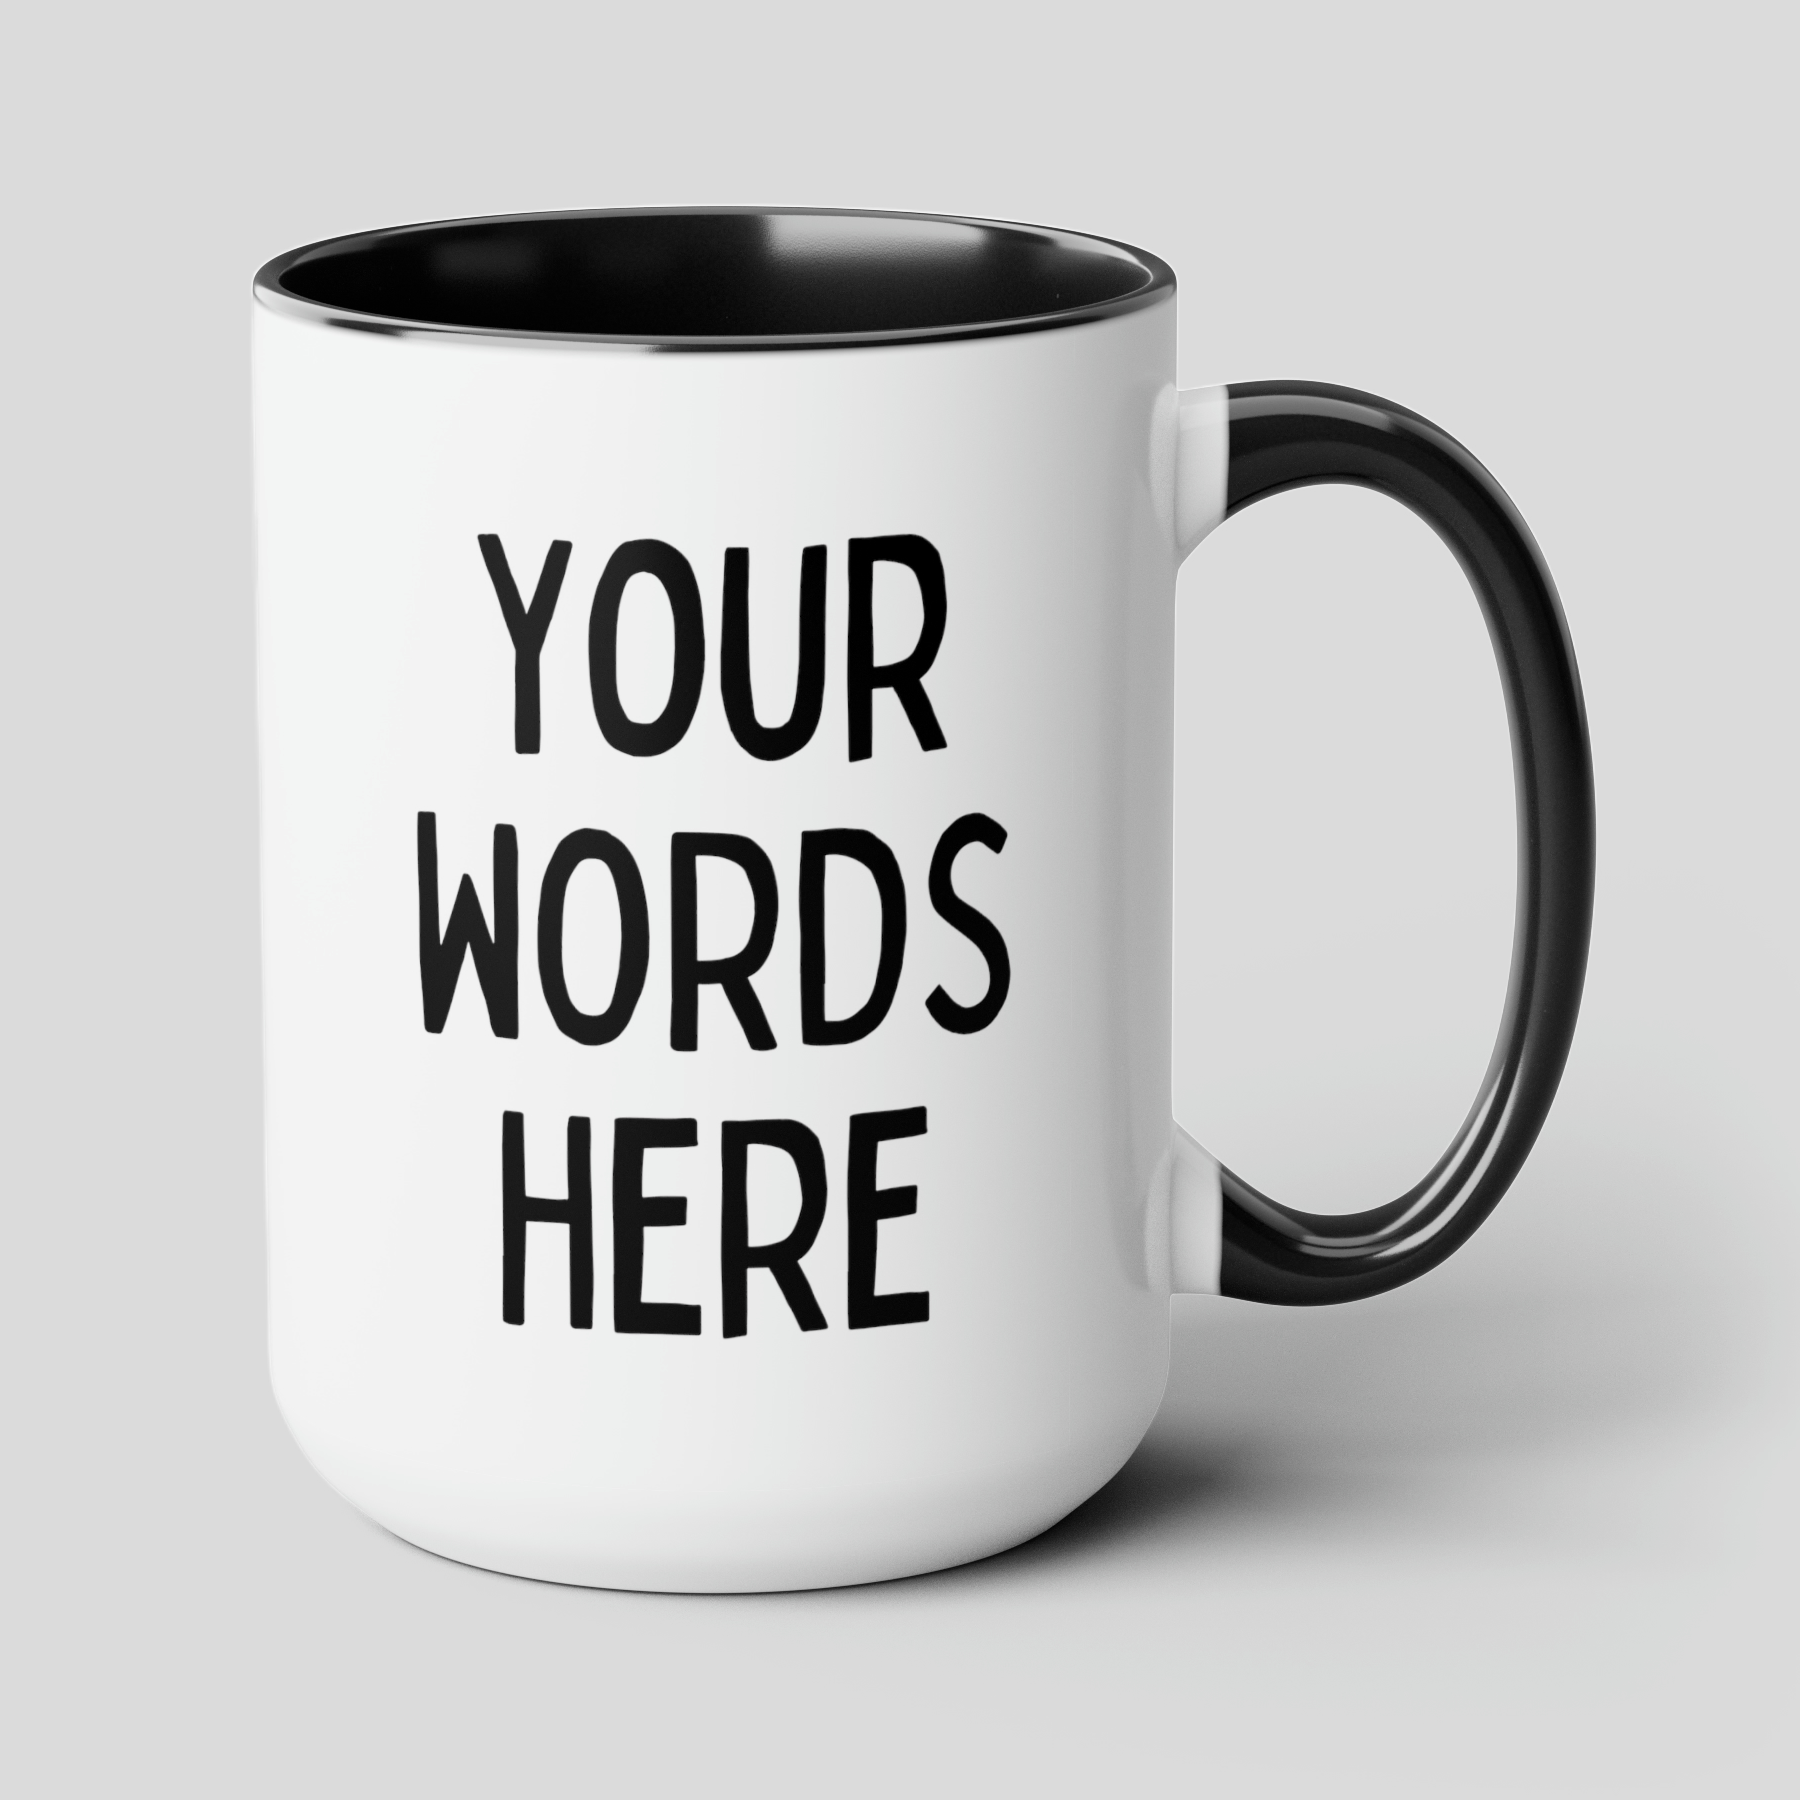 Add Your Text 15oz white with black accent funny large coffee mug gift for friend family create your own custom personalize customize waveywares wavey wares wavywares wavy wares cover